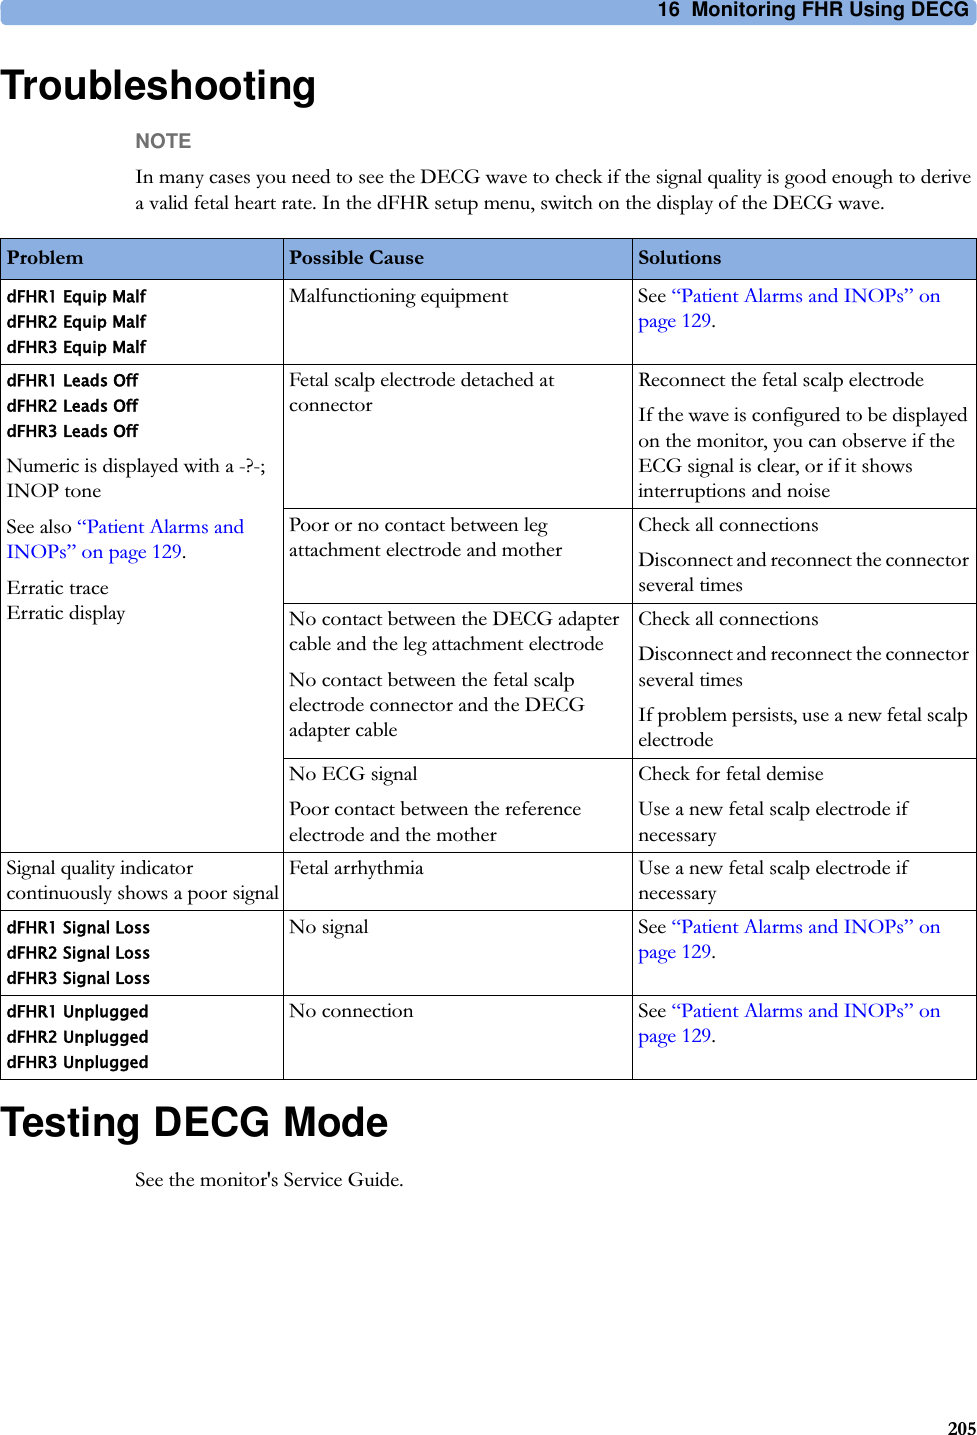 16  Monitoring FHR Using DECG205TroubleshootingNOTEIn many cases you need to see the DECG wave to check if the signal quality is good enough to derive a valid fetal heart rate. In the dFHR setup menu, switch on the display of the DECG wave.Testing DECG ModeSee the monitor&apos;s Service Guide.Problem Possible Cause SolutionsdFHR1 Equip Malf dFHR2 Equip Malf dFHR3 Equip MalfMalfunctioning equipment See “Patient Alarms and INOPs” on page 129.dFHR1 Leads Off dFHR2 Leads Off dFHR3 Leads OffNumeric is displayed with a -?-; INOP toneSee also “Patient Alarms and INOPs” on page 129.Erratic trace Erratic displayFetal scalp electrode detached at connectorReconnect the fetal scalp electrodeIf the wave is configured to be displayed on the monitor, you can observe if the ECG signal is clear, or if it shows interruptions and noisePoor or no contact between leg attachment electrode and motherCheck all connectionsDisconnect and reconnect the connector several timesNo contact between the DECG adapter cable and the leg attachment electrodeNo contact between the fetal scalp electrode connector and the DECG adapter cableCheck all connectionsDisconnect and reconnect the connector several timesIf problem persists, use a new fetal scalp electrodeNo ECG signalPoor contact between the reference electrode and the motherCheck for fetal demiseUse a new fetal scalp electrode if necessarySignal quality indicator continuously shows a poor signalFetal arrhythmia Use a new fetal scalp electrode if necessarydFHR1 Signal Loss dFHR2 Signal Loss dFHR3 Signal LossNo signal See “Patient Alarms and INOPs” on page 129.dFHR1 Unplugged dFHR2 Unplugged dFHR3 UnpluggedNo connection See “Patient Alarms and INOPs” on page 129.